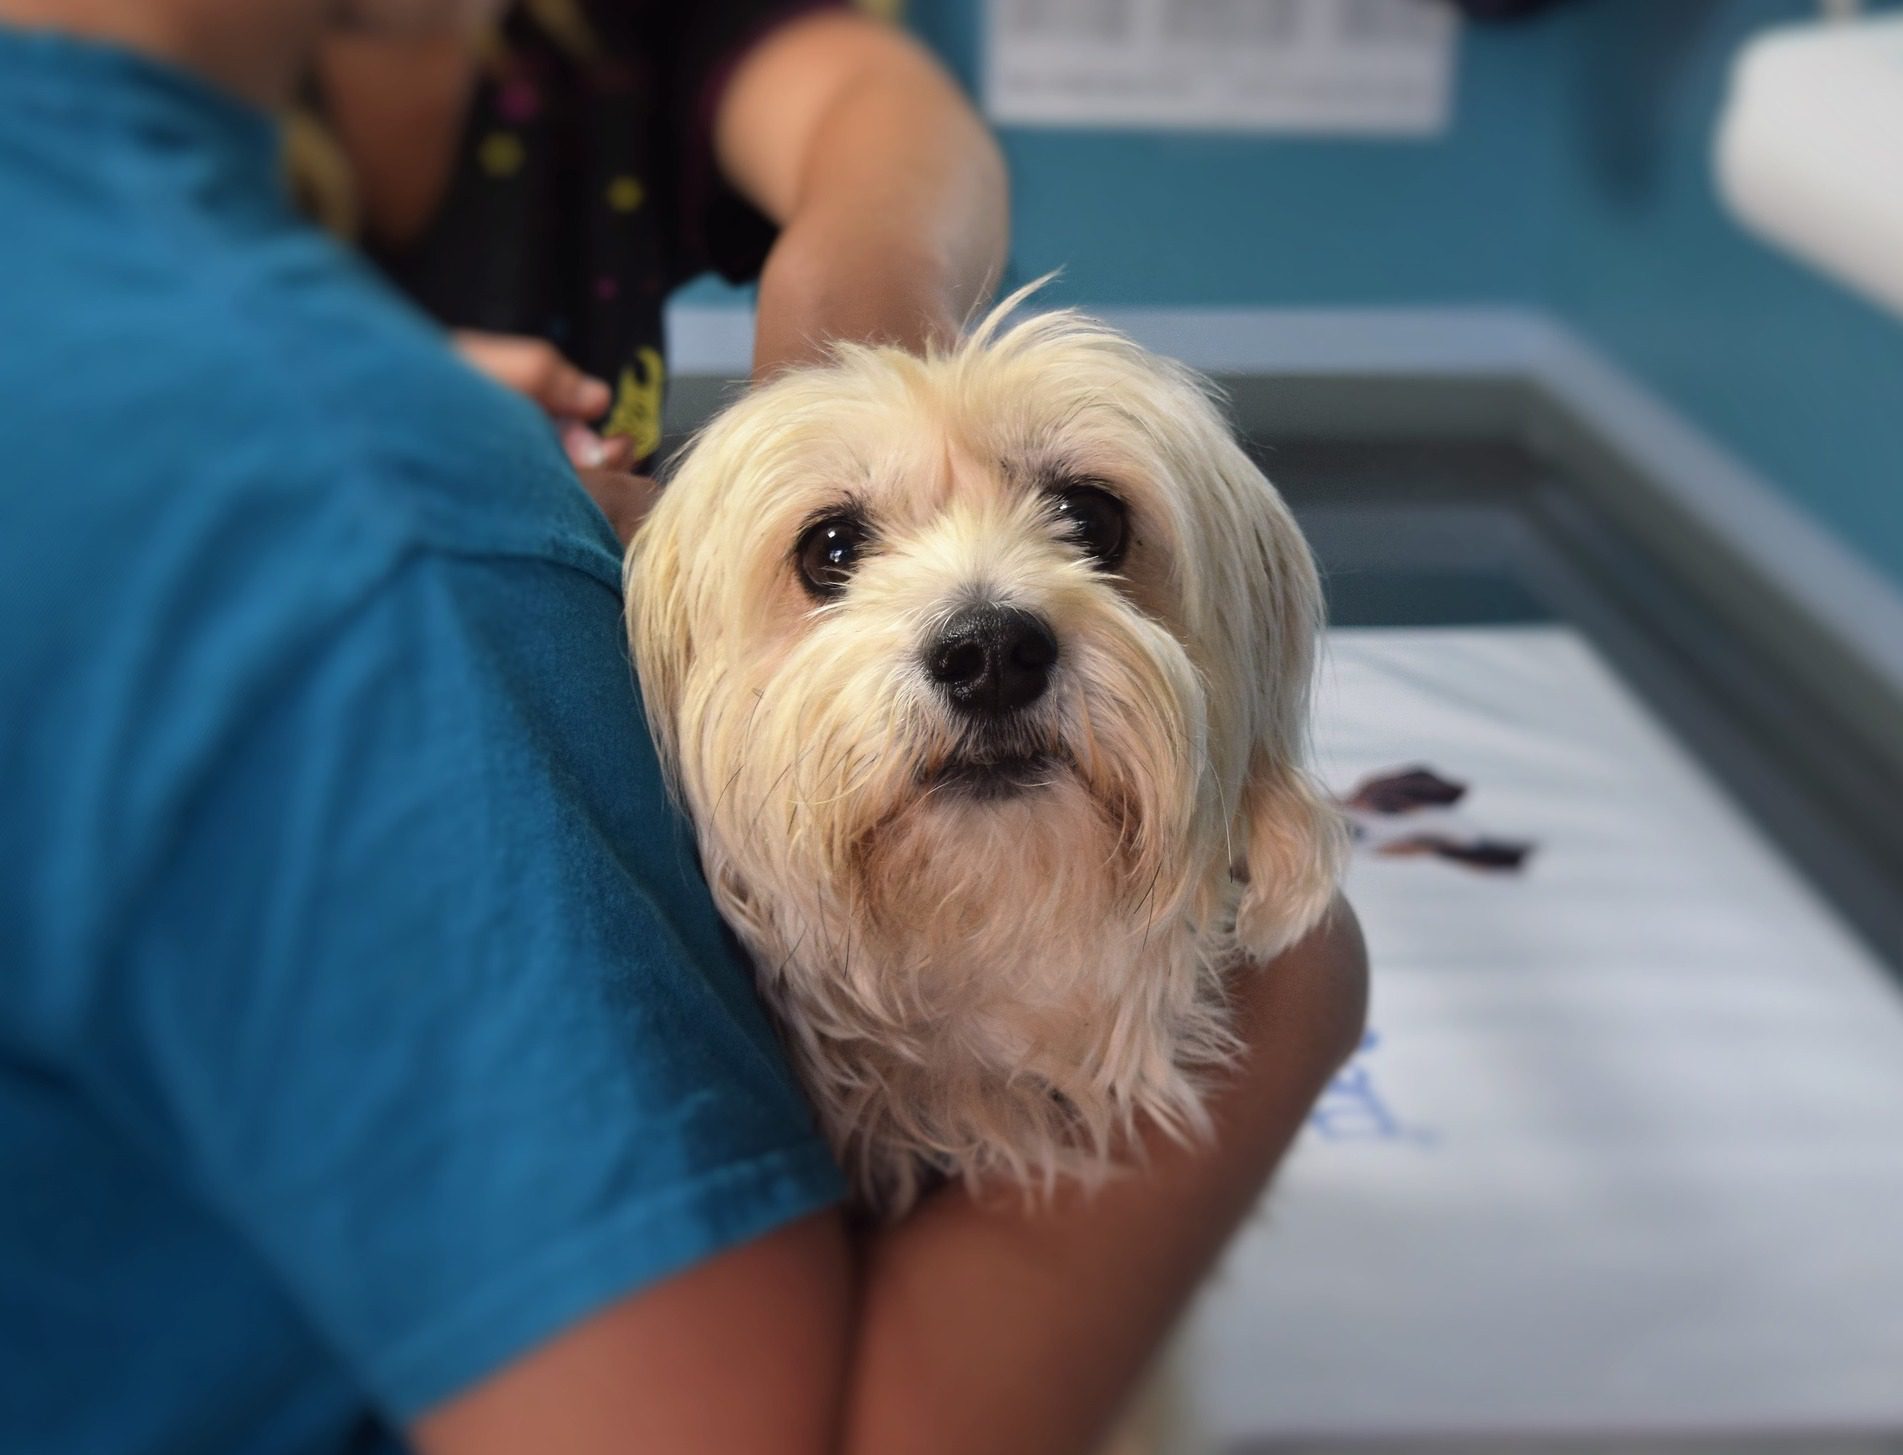 Some types of dogs require more frequent visits to the vet physician than other breeds.